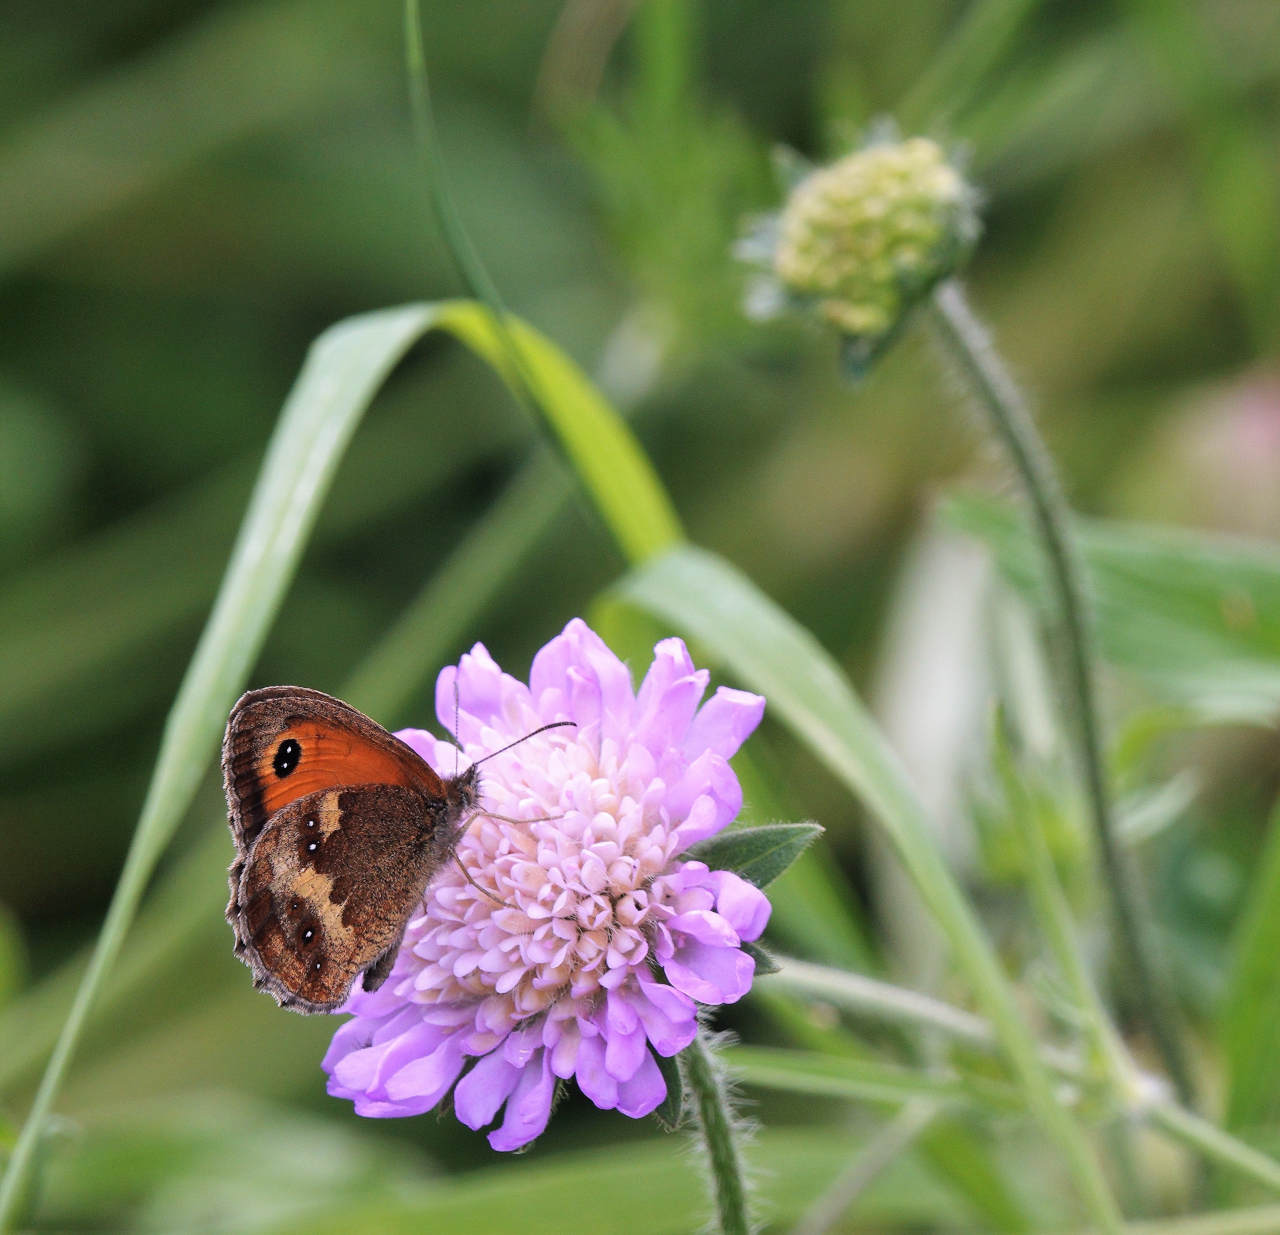 The Gatekeeper feeding on scabious, a classic nectar plant